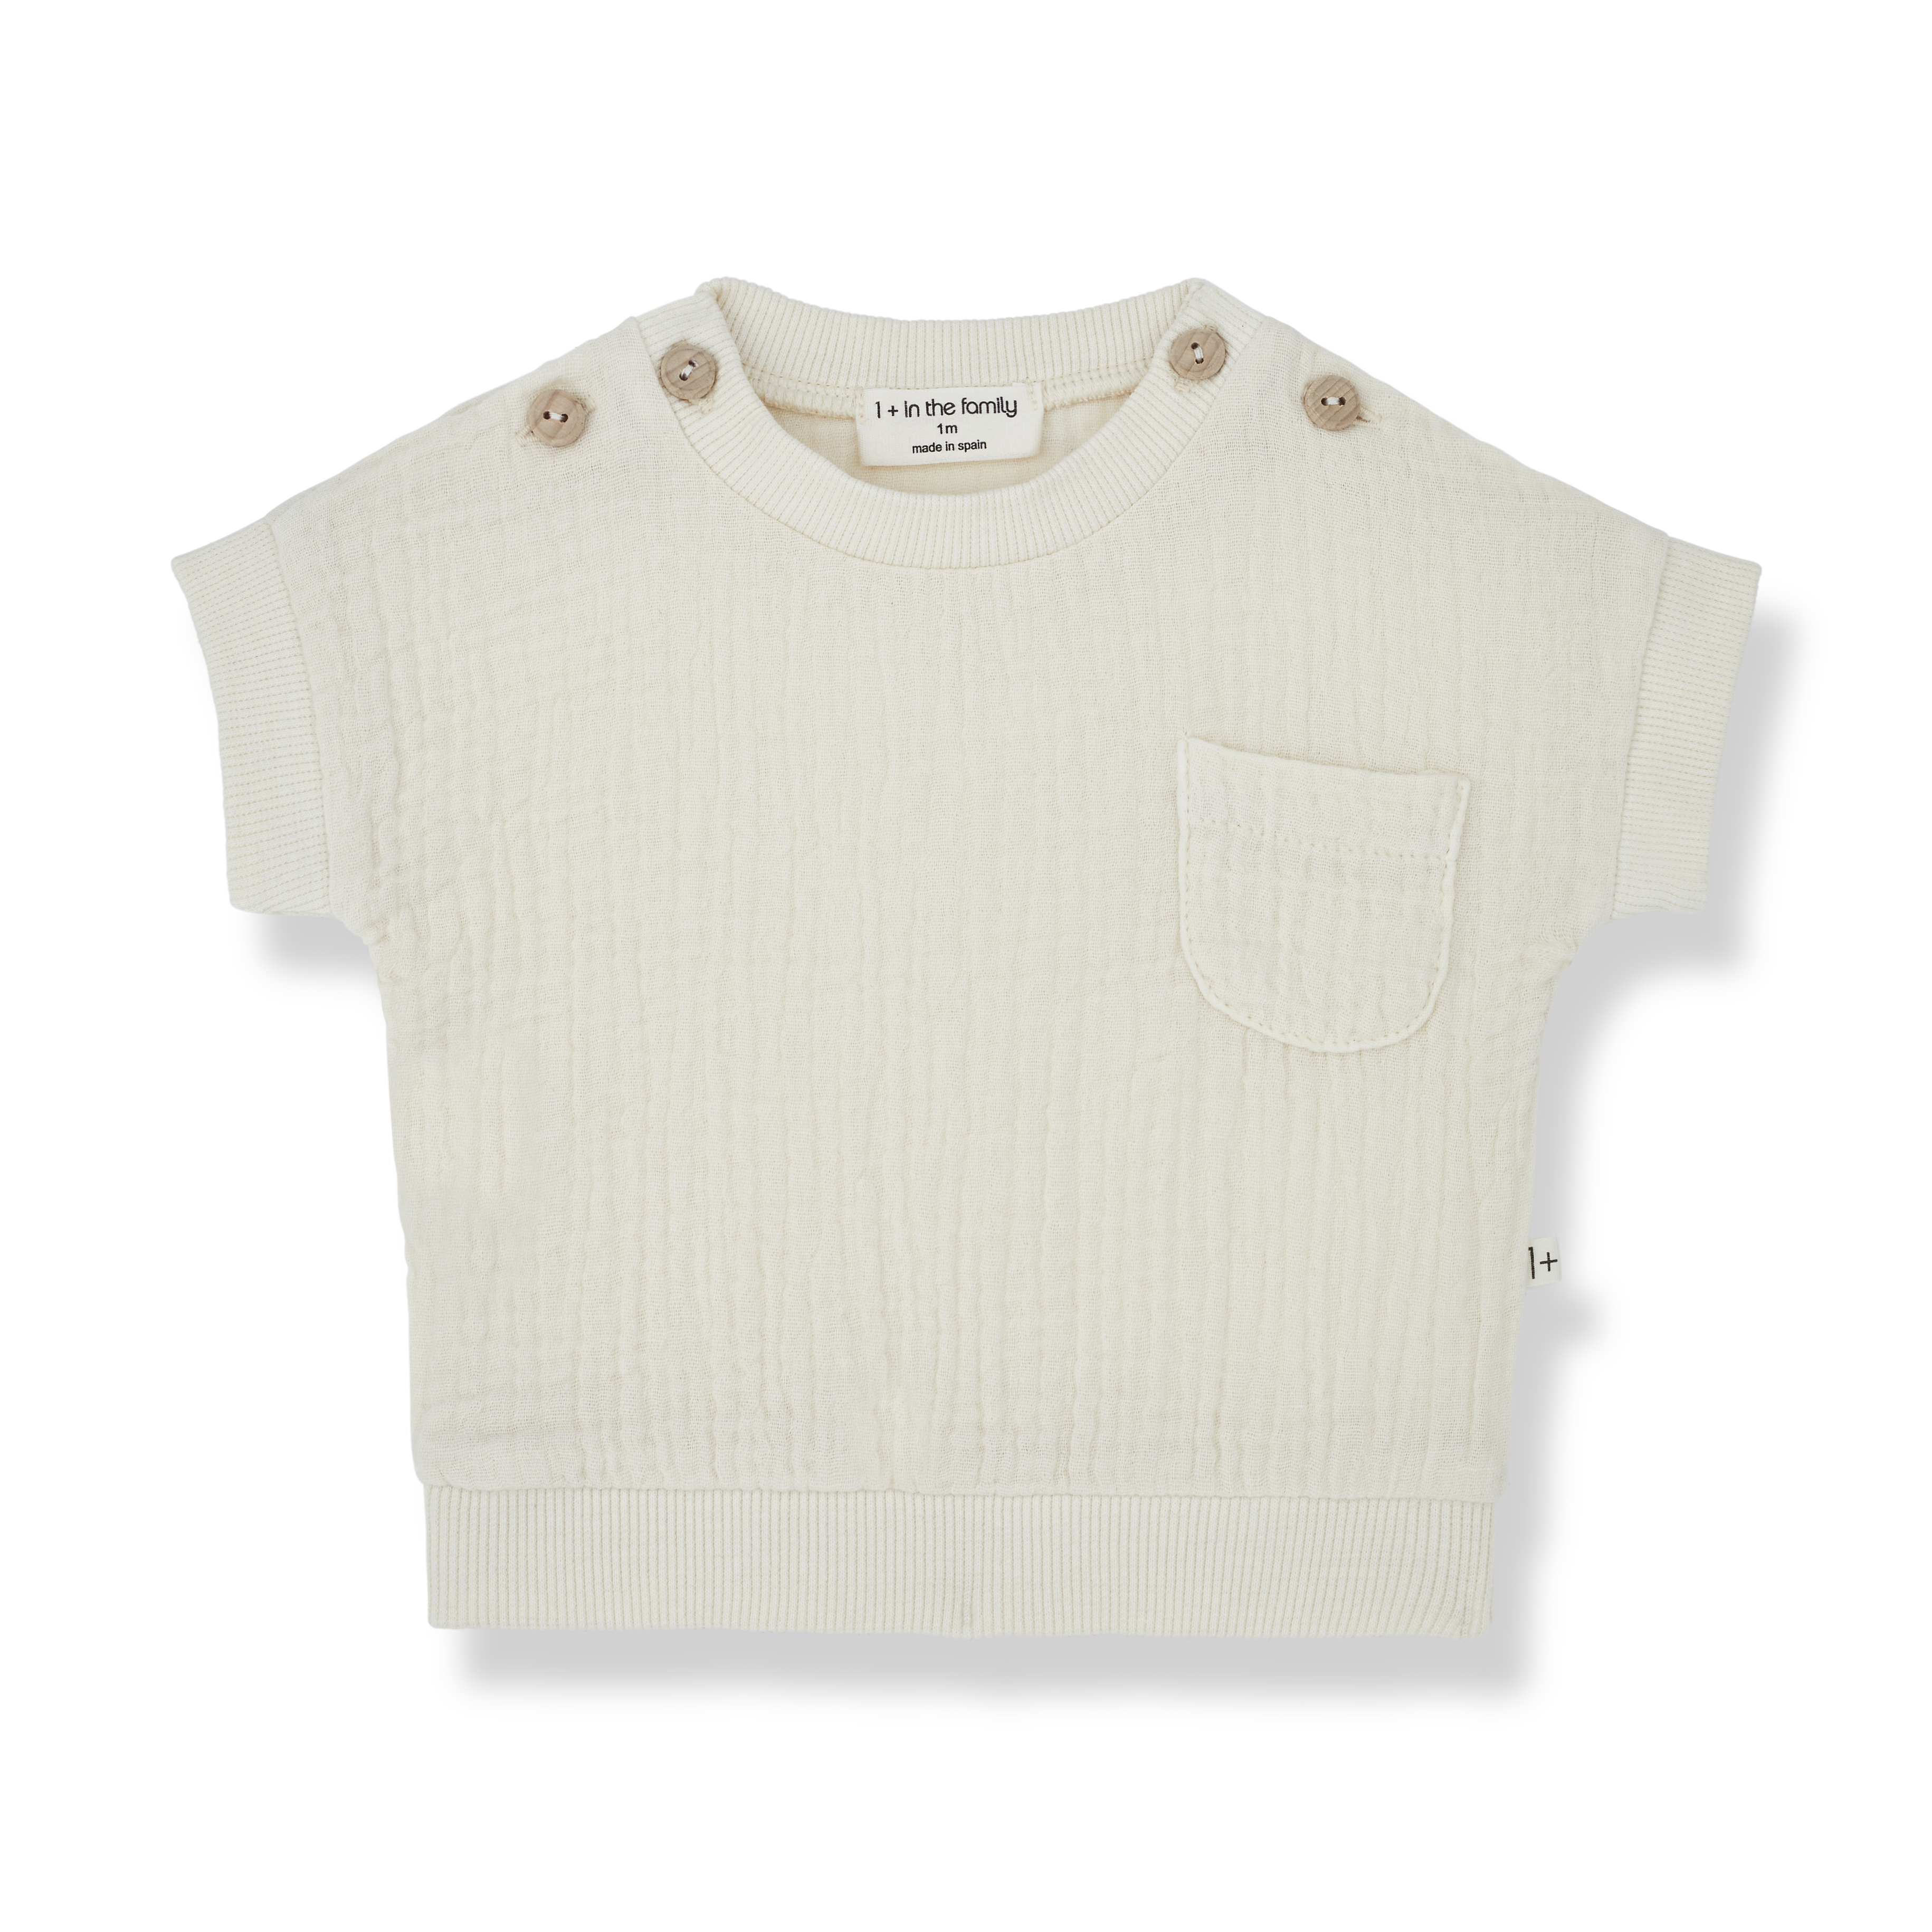 1+ in the family - daniele - muslin t-shirt - ivory